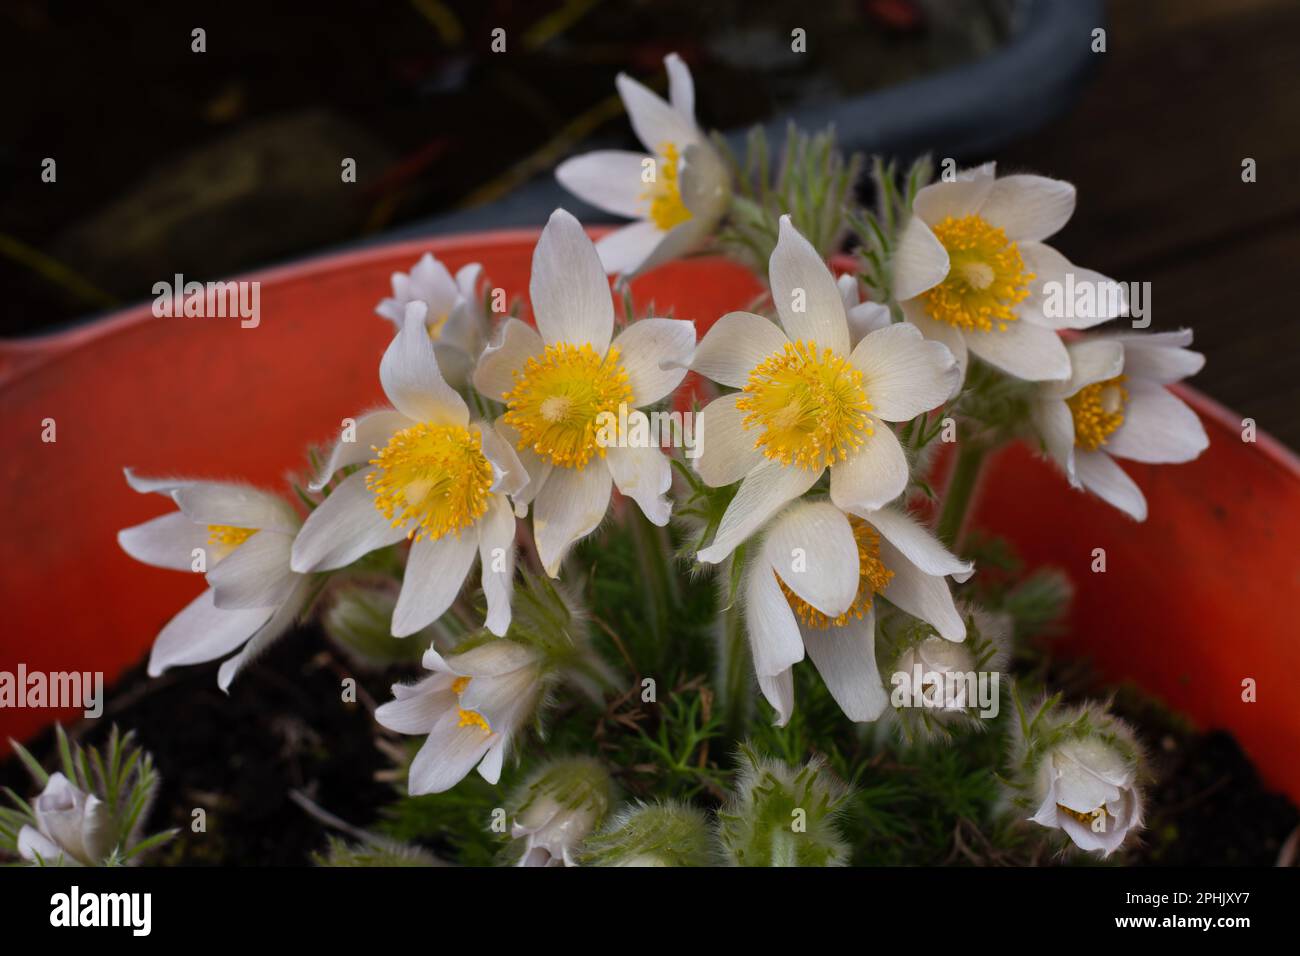 pulsatilla alba young plant with many flowers Stock Photo